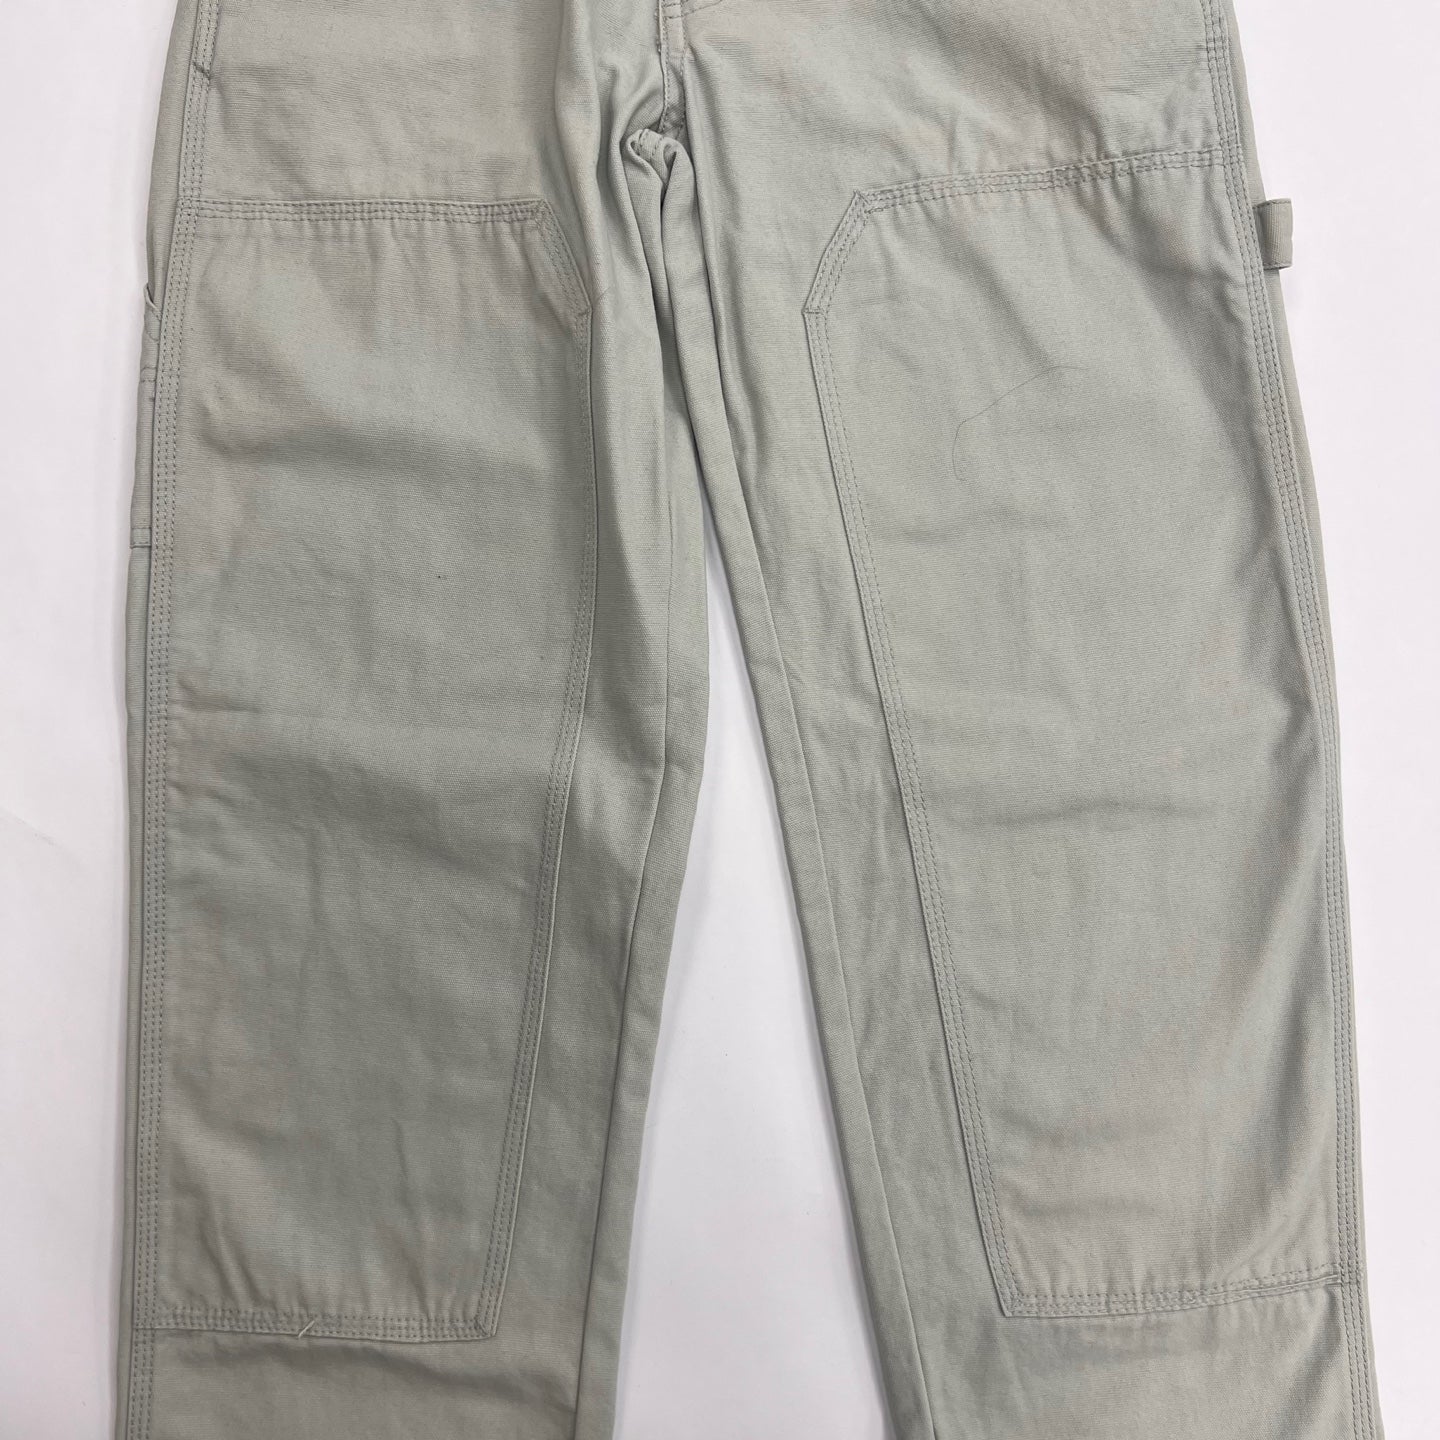 SWITCH Over Dyed Canvas Cargo Pants